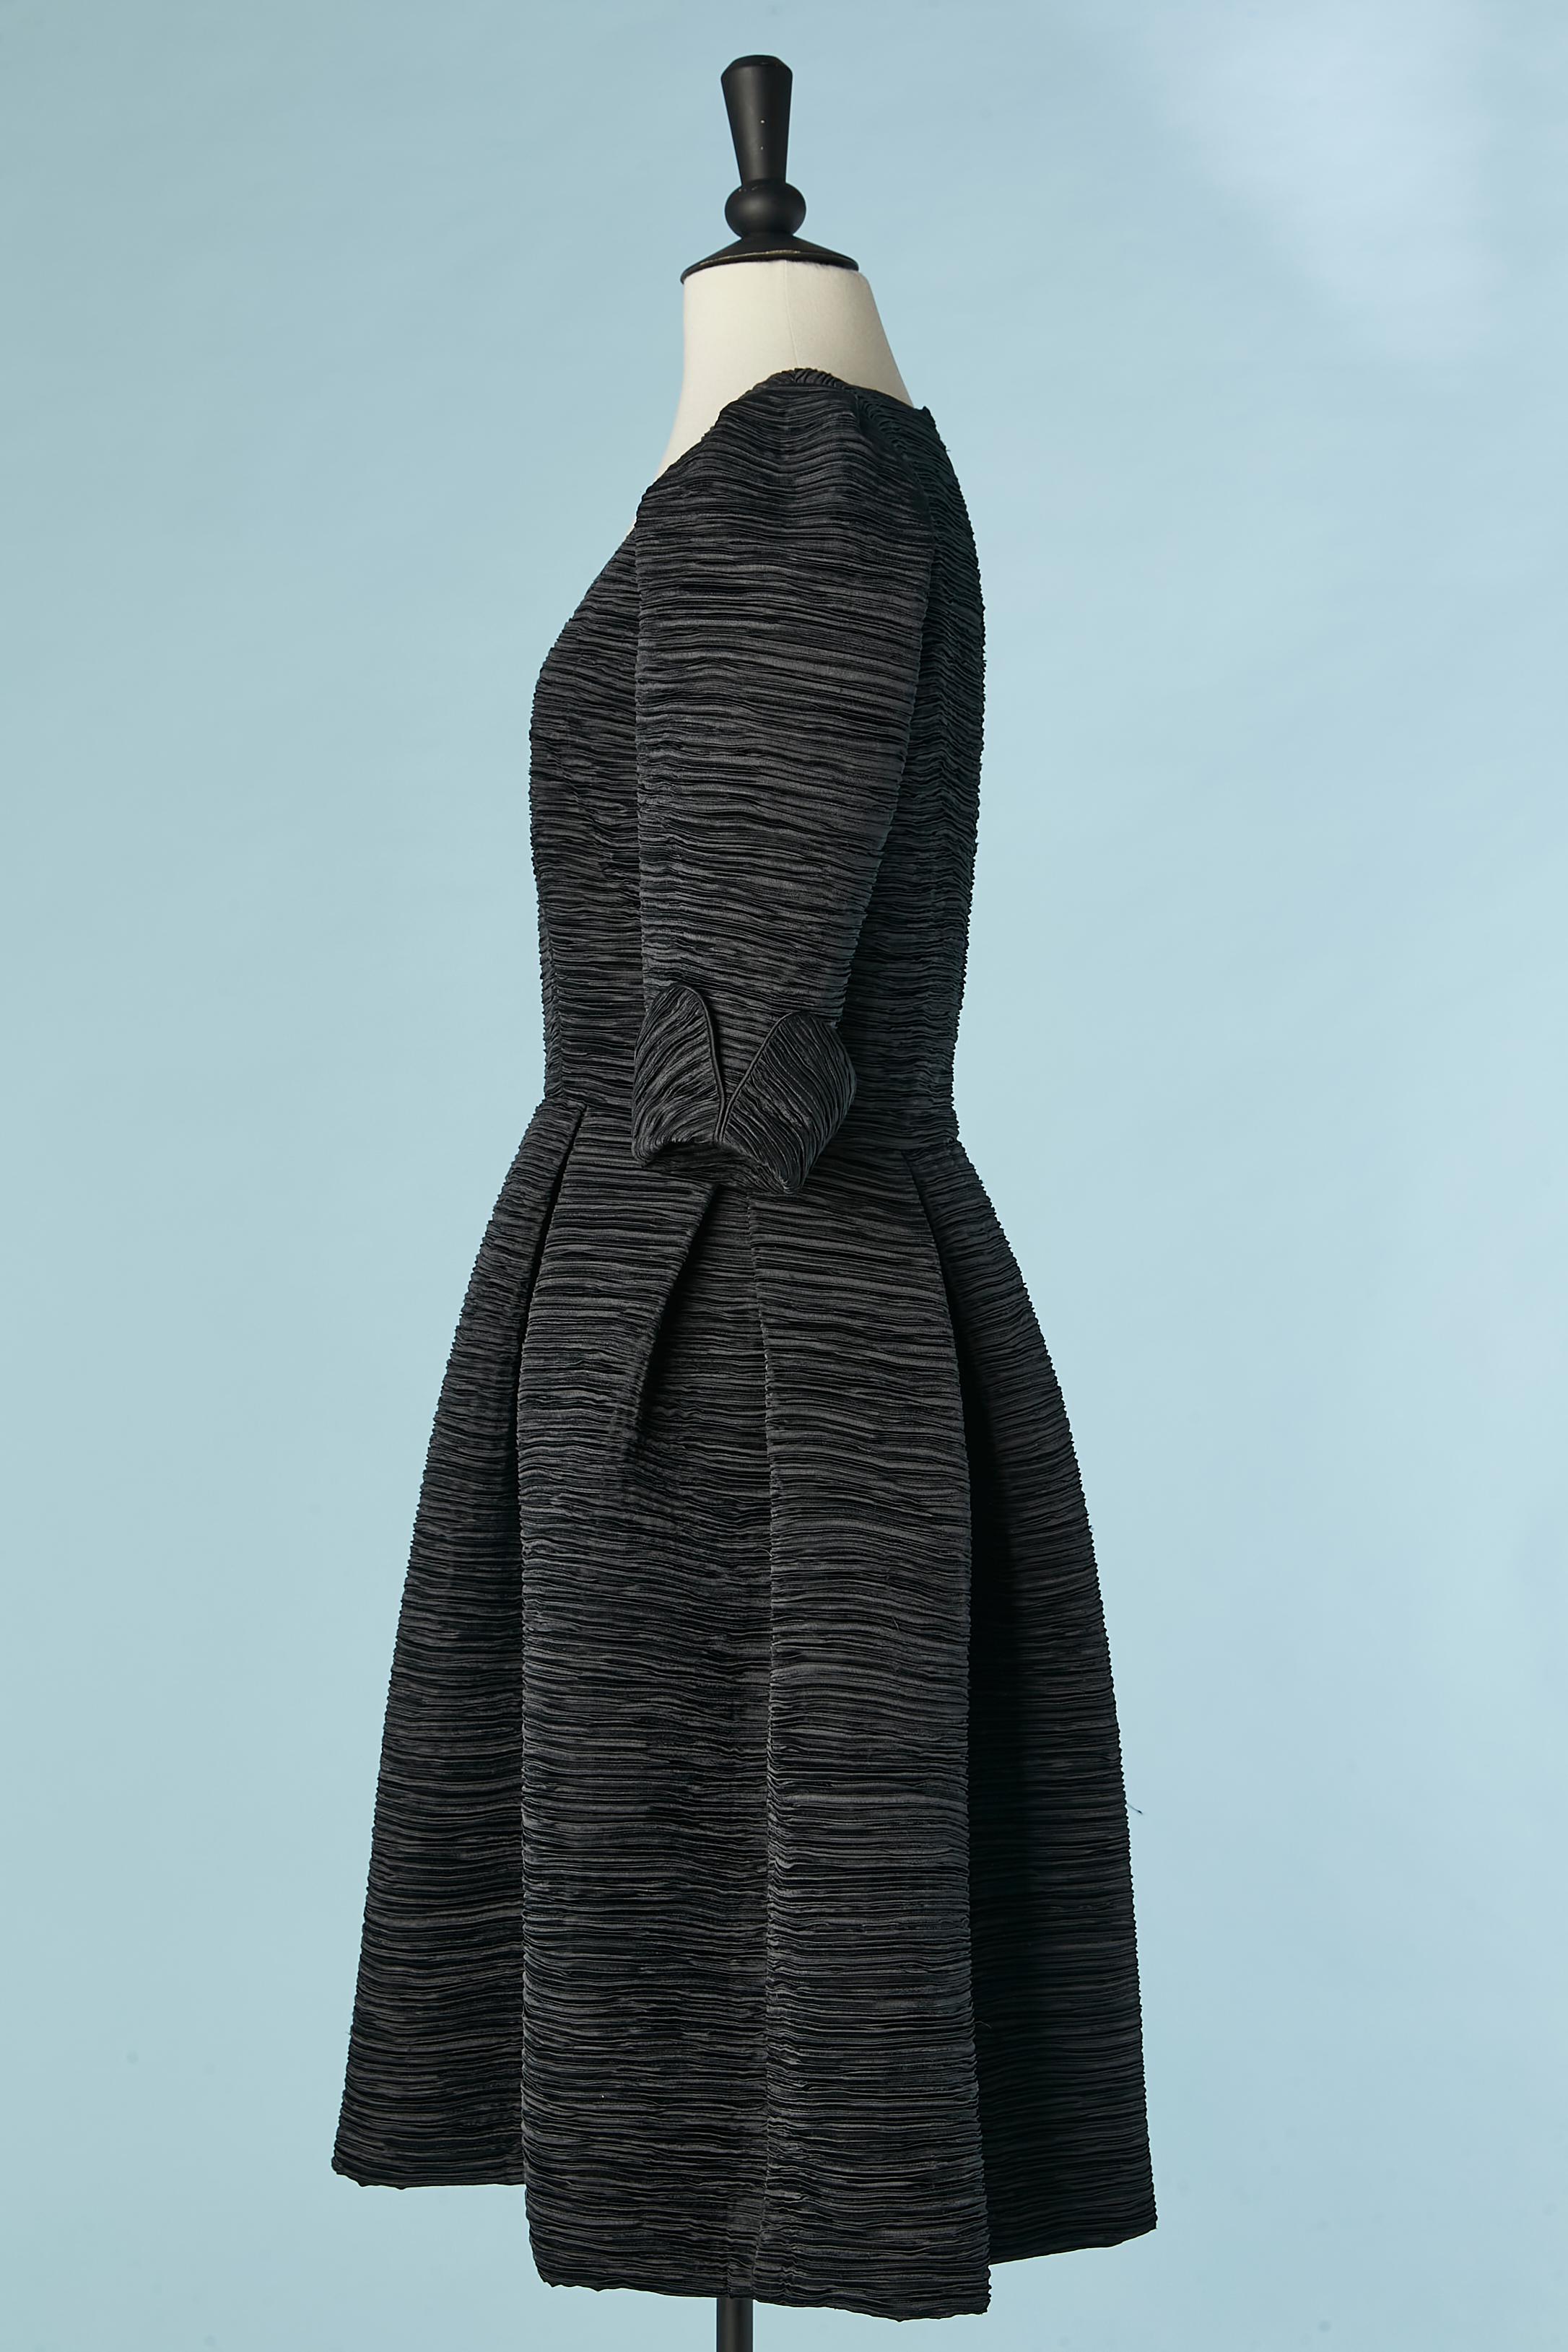 Black cocktail dress in Fortuny pleated fabric  Pierre Labiche Circa 1980's  For Sale 2